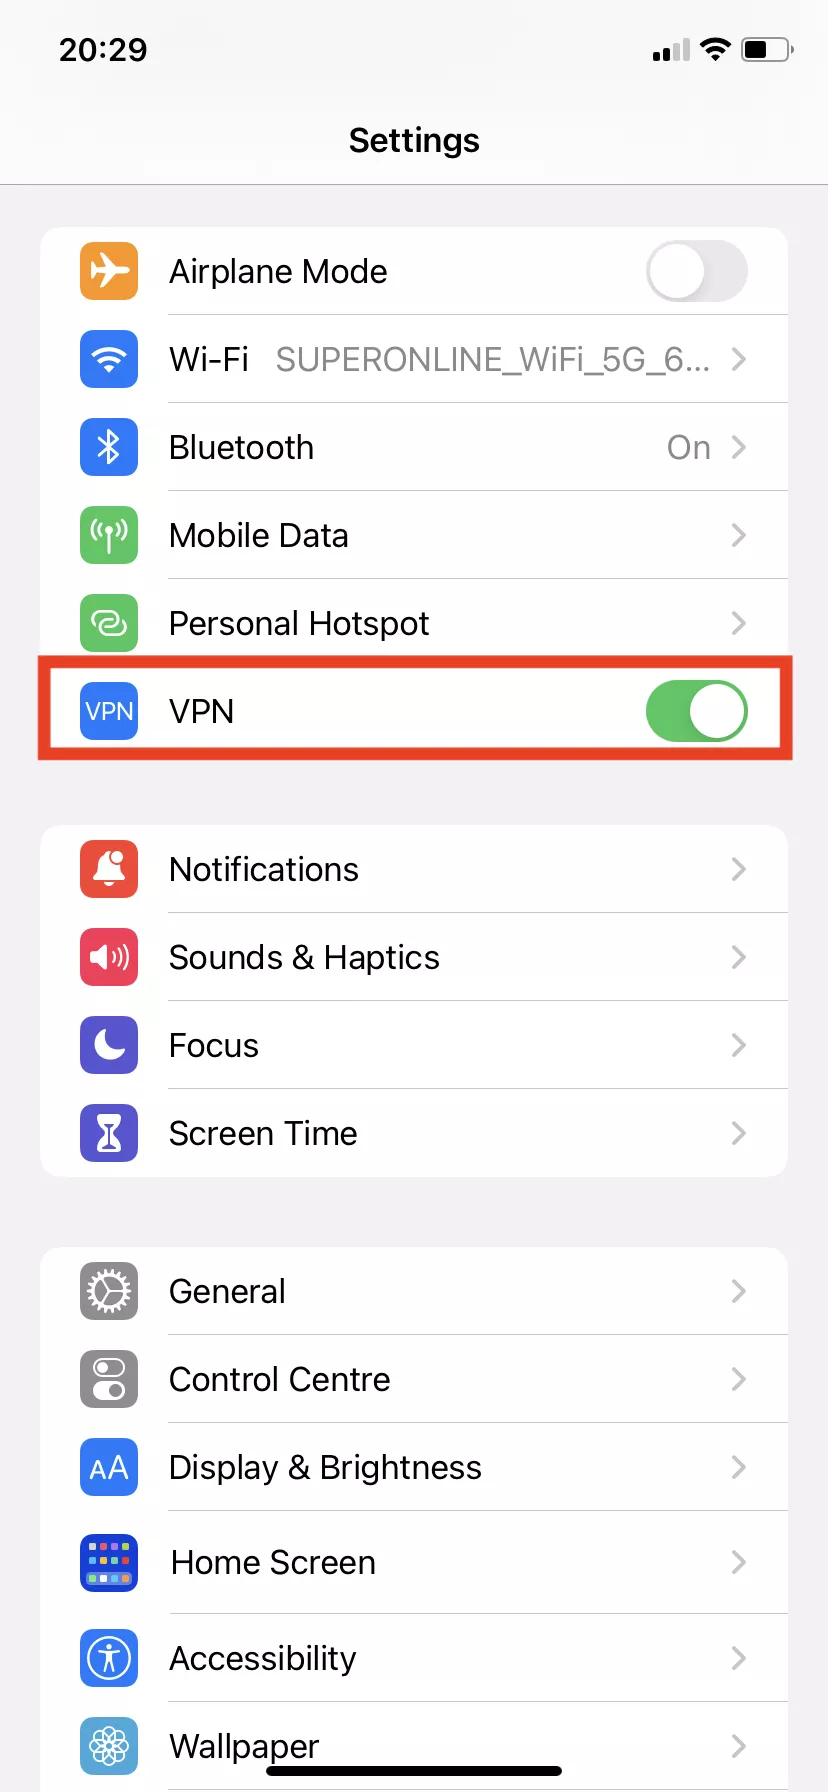 How did VPN get added on my iPhone?